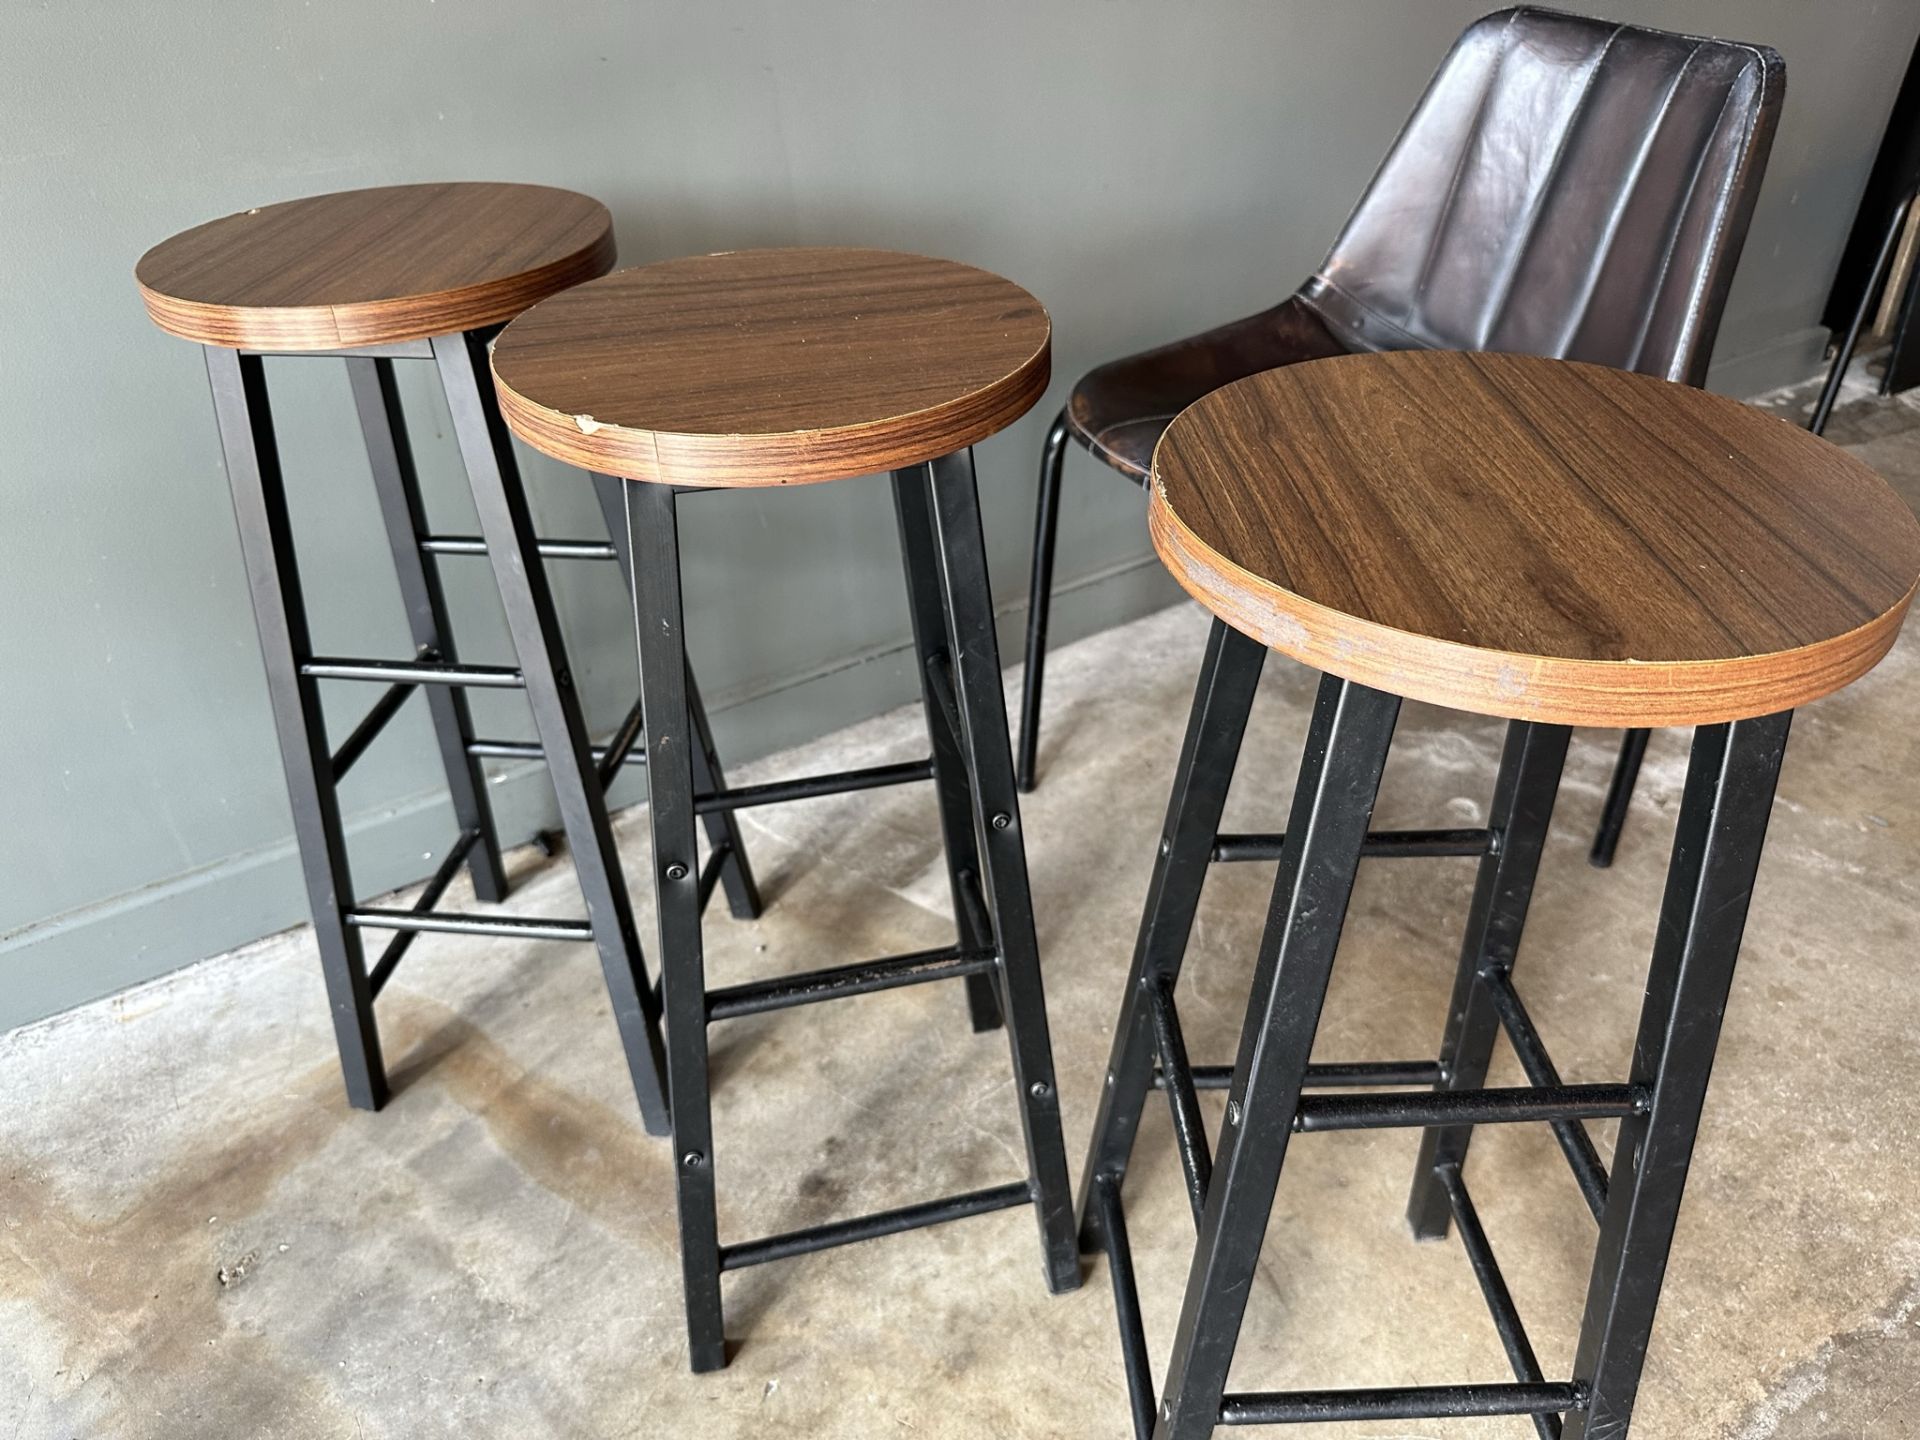 High Wooden Table With Stools With 3 Stools - Bild 4 aus 4